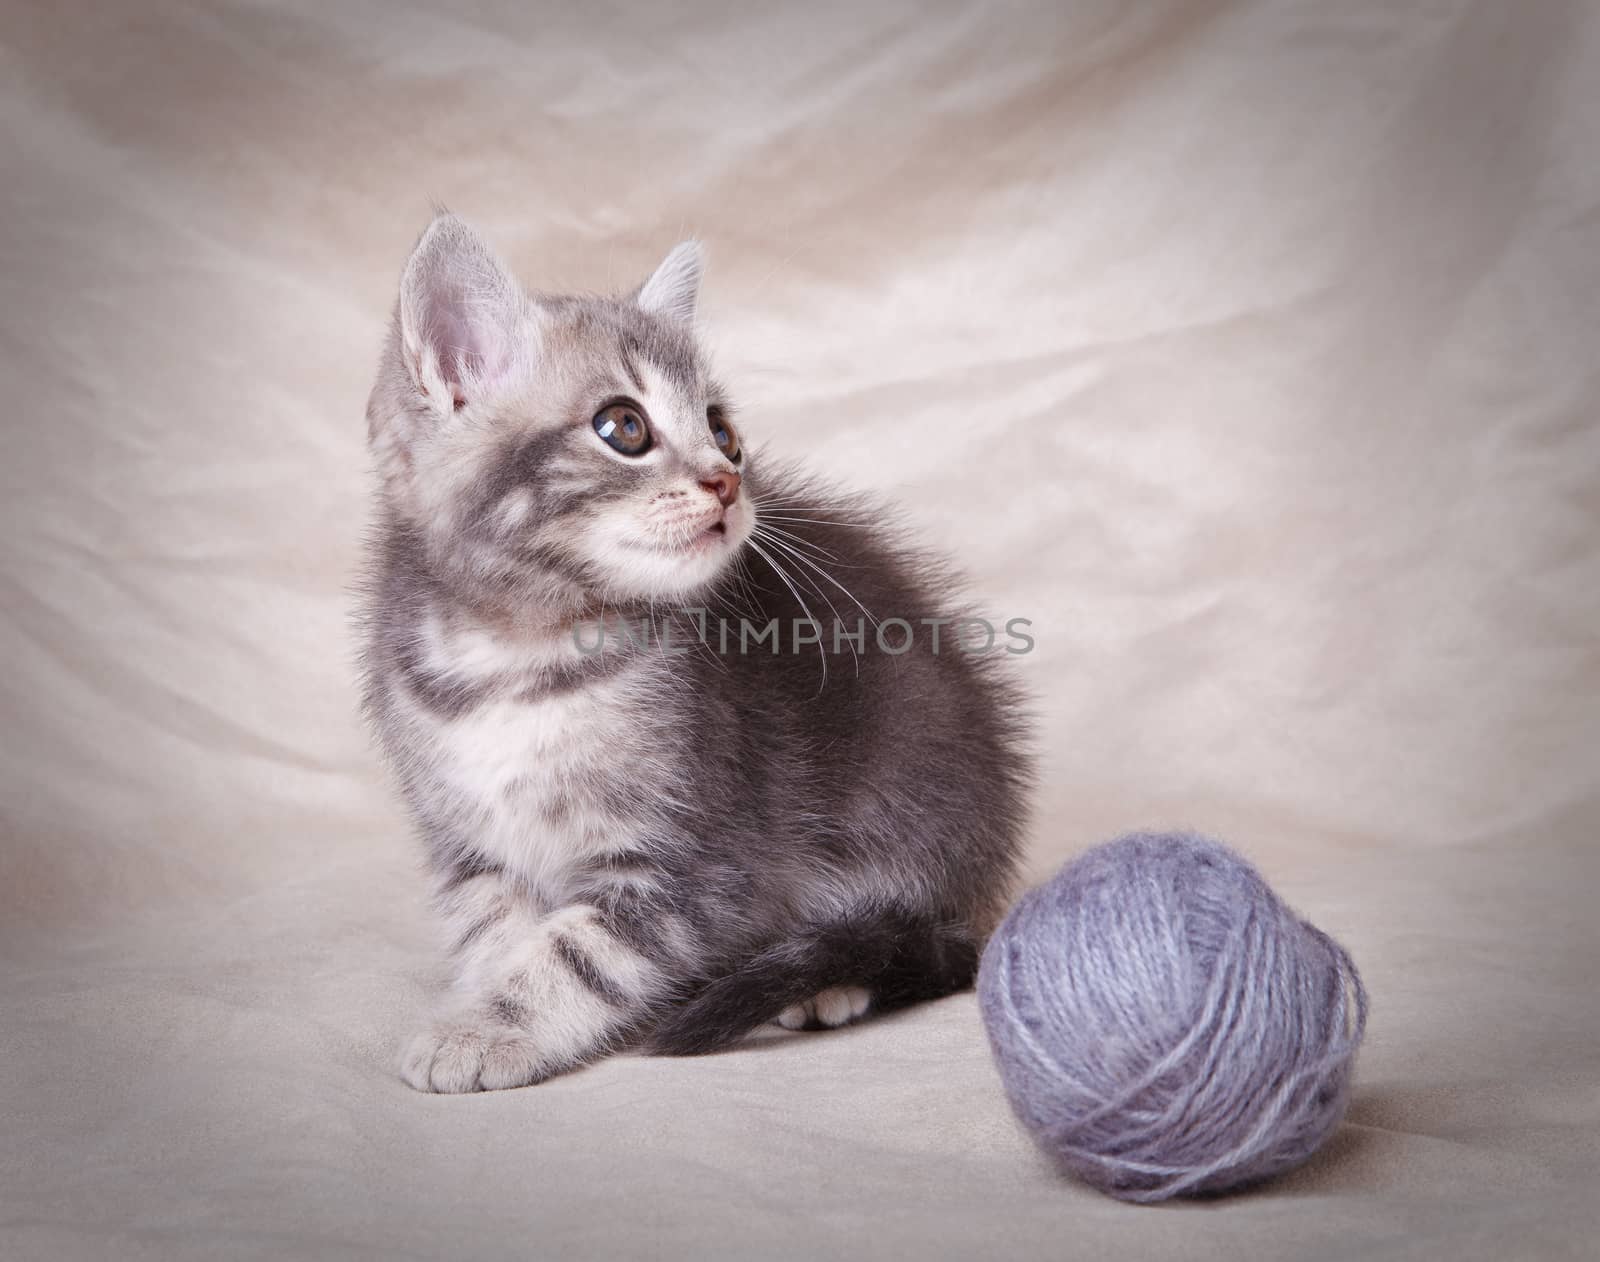 beautiful gray tabby kitten with  ball  on gray background